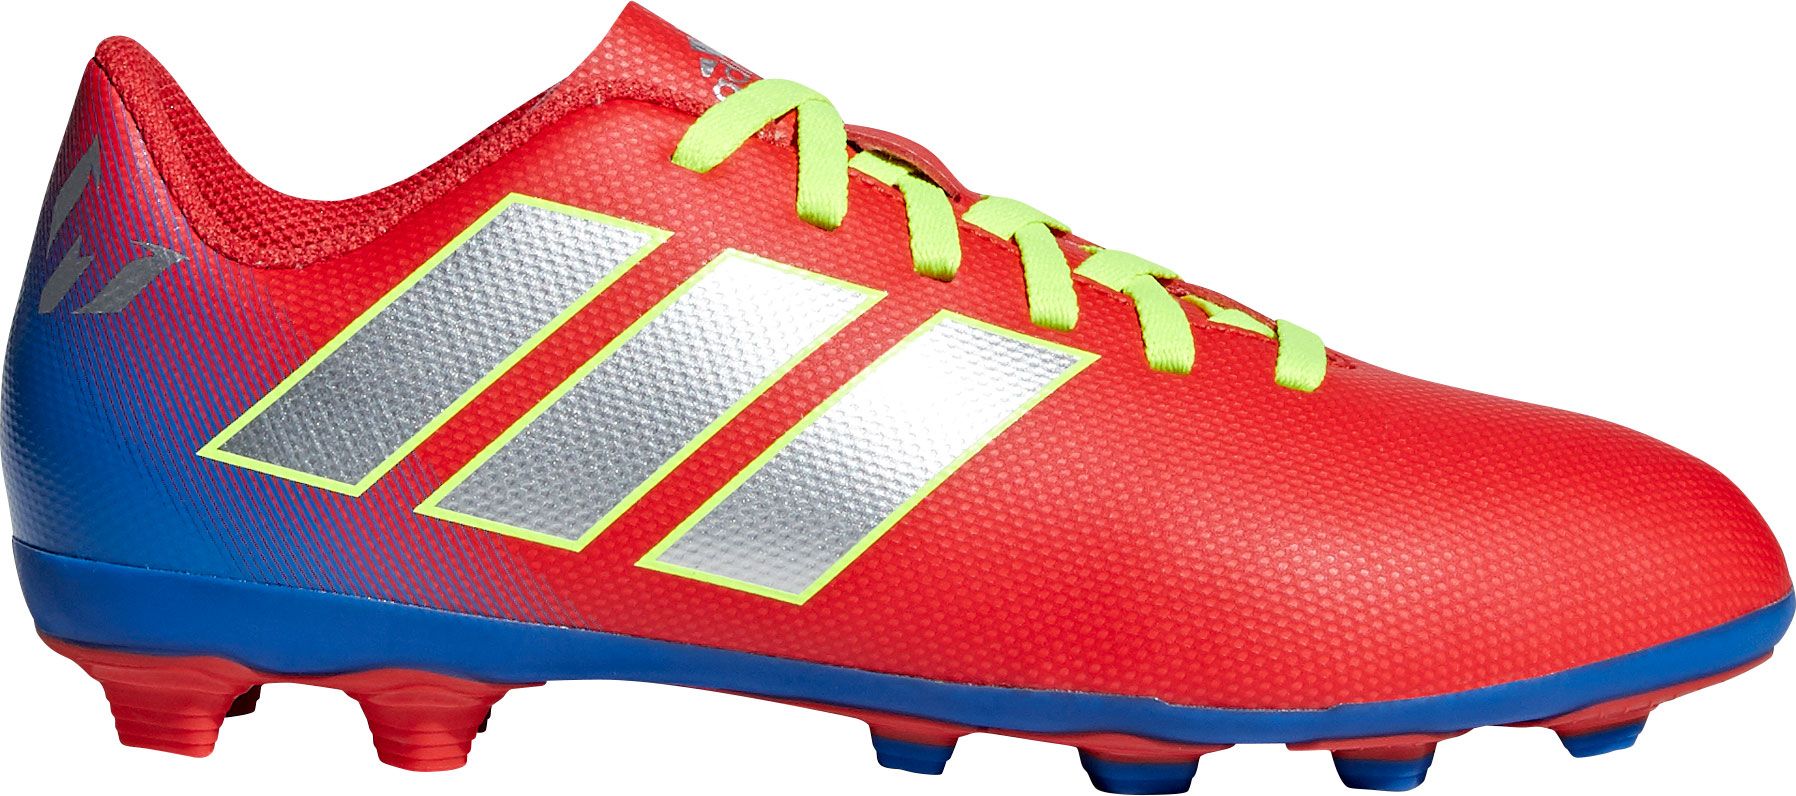 Kids' Messi Cleats | Best Price Guarantee at DICK'S